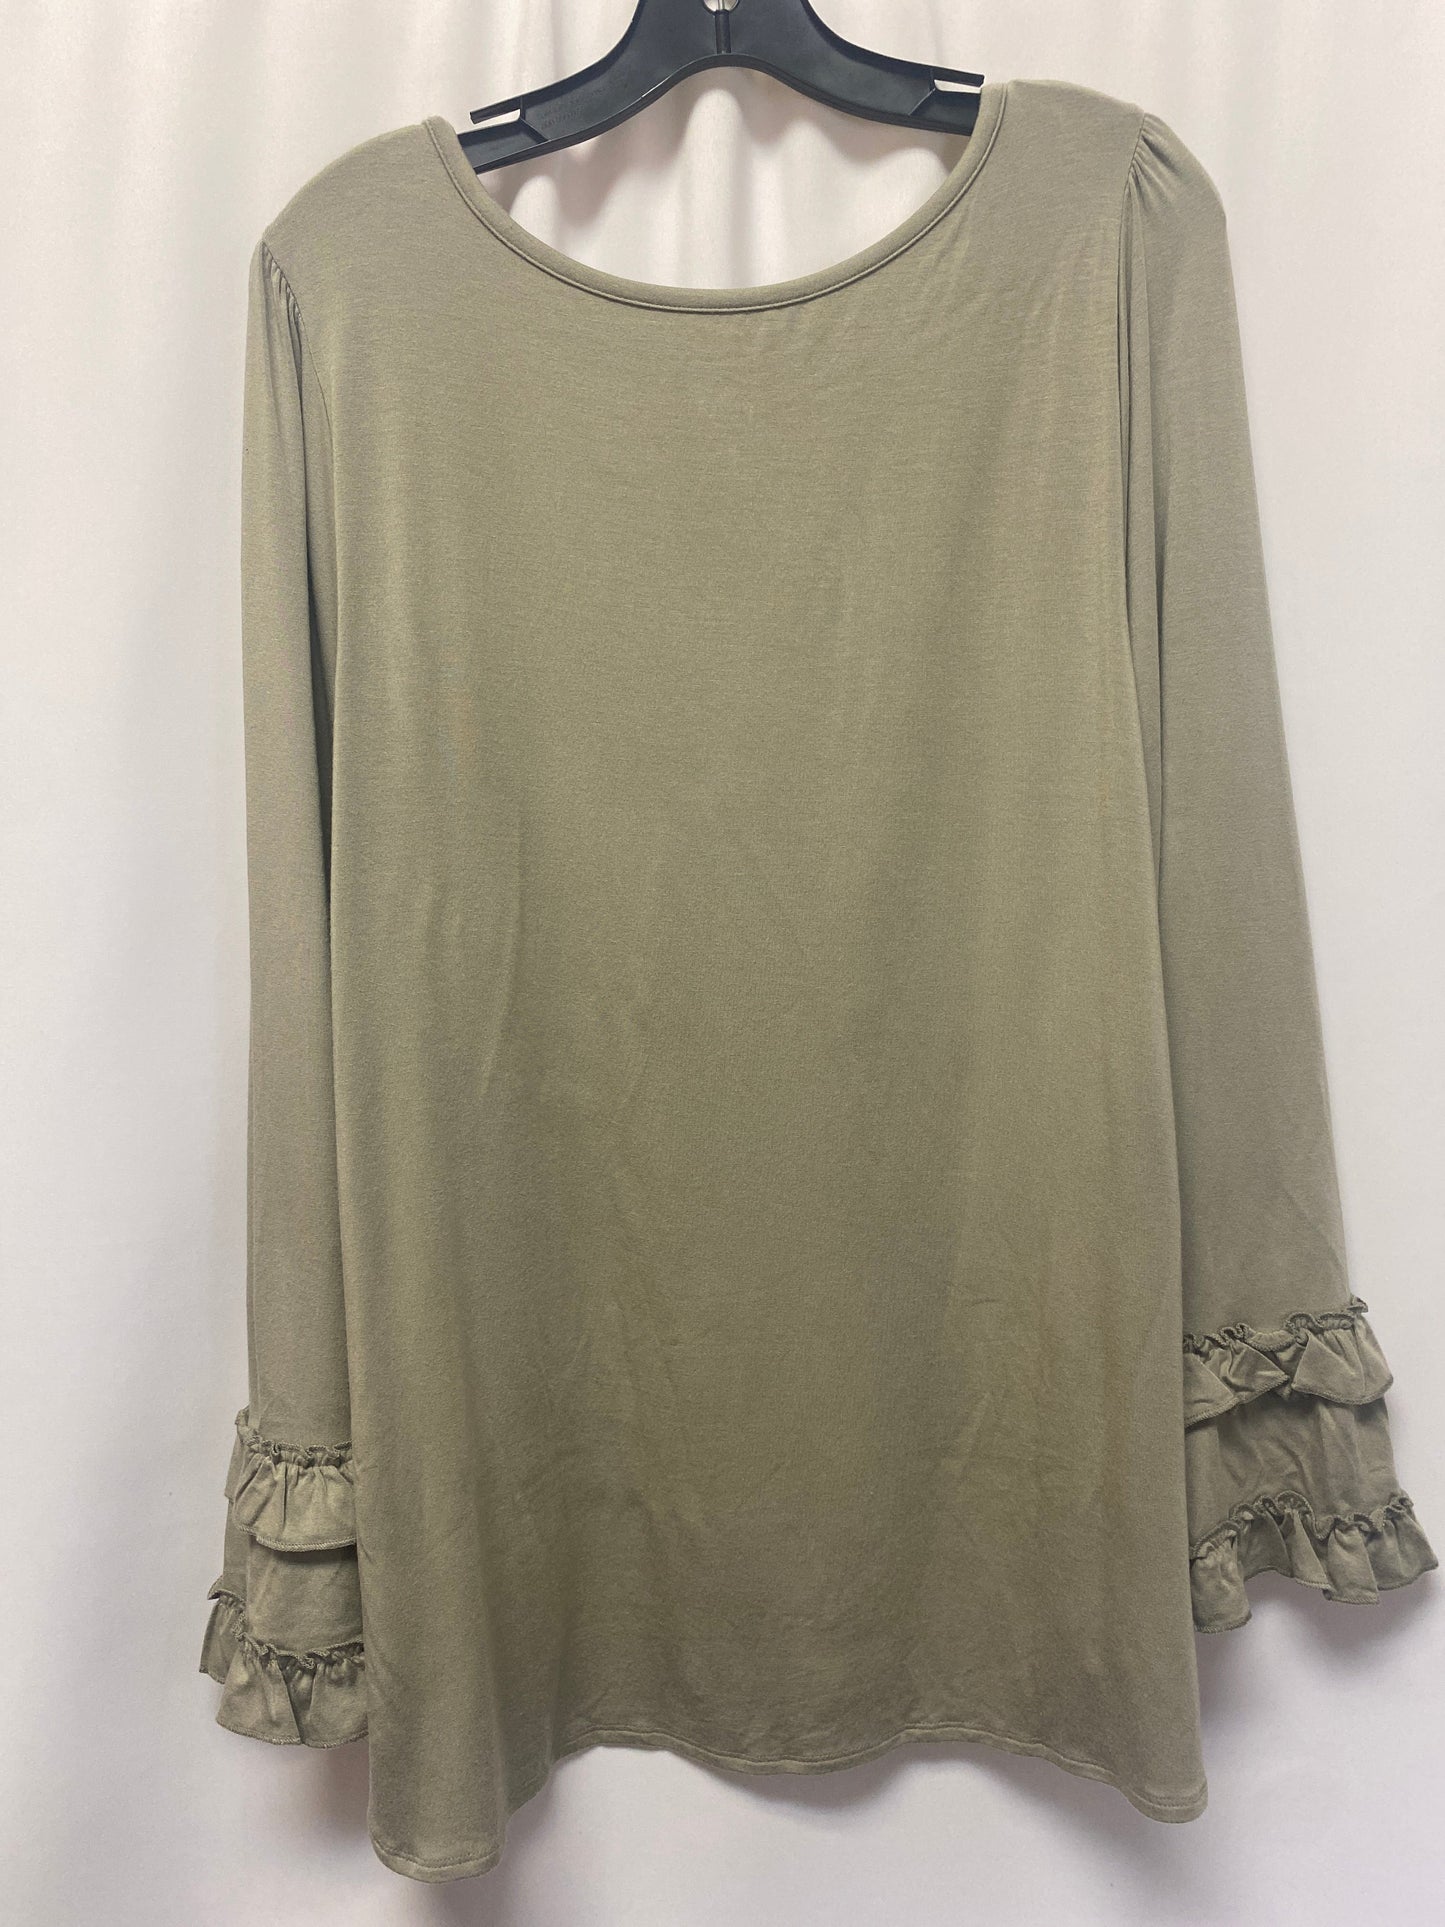 Green Top Long Sleeve Belle By Kim Gravel, Size L